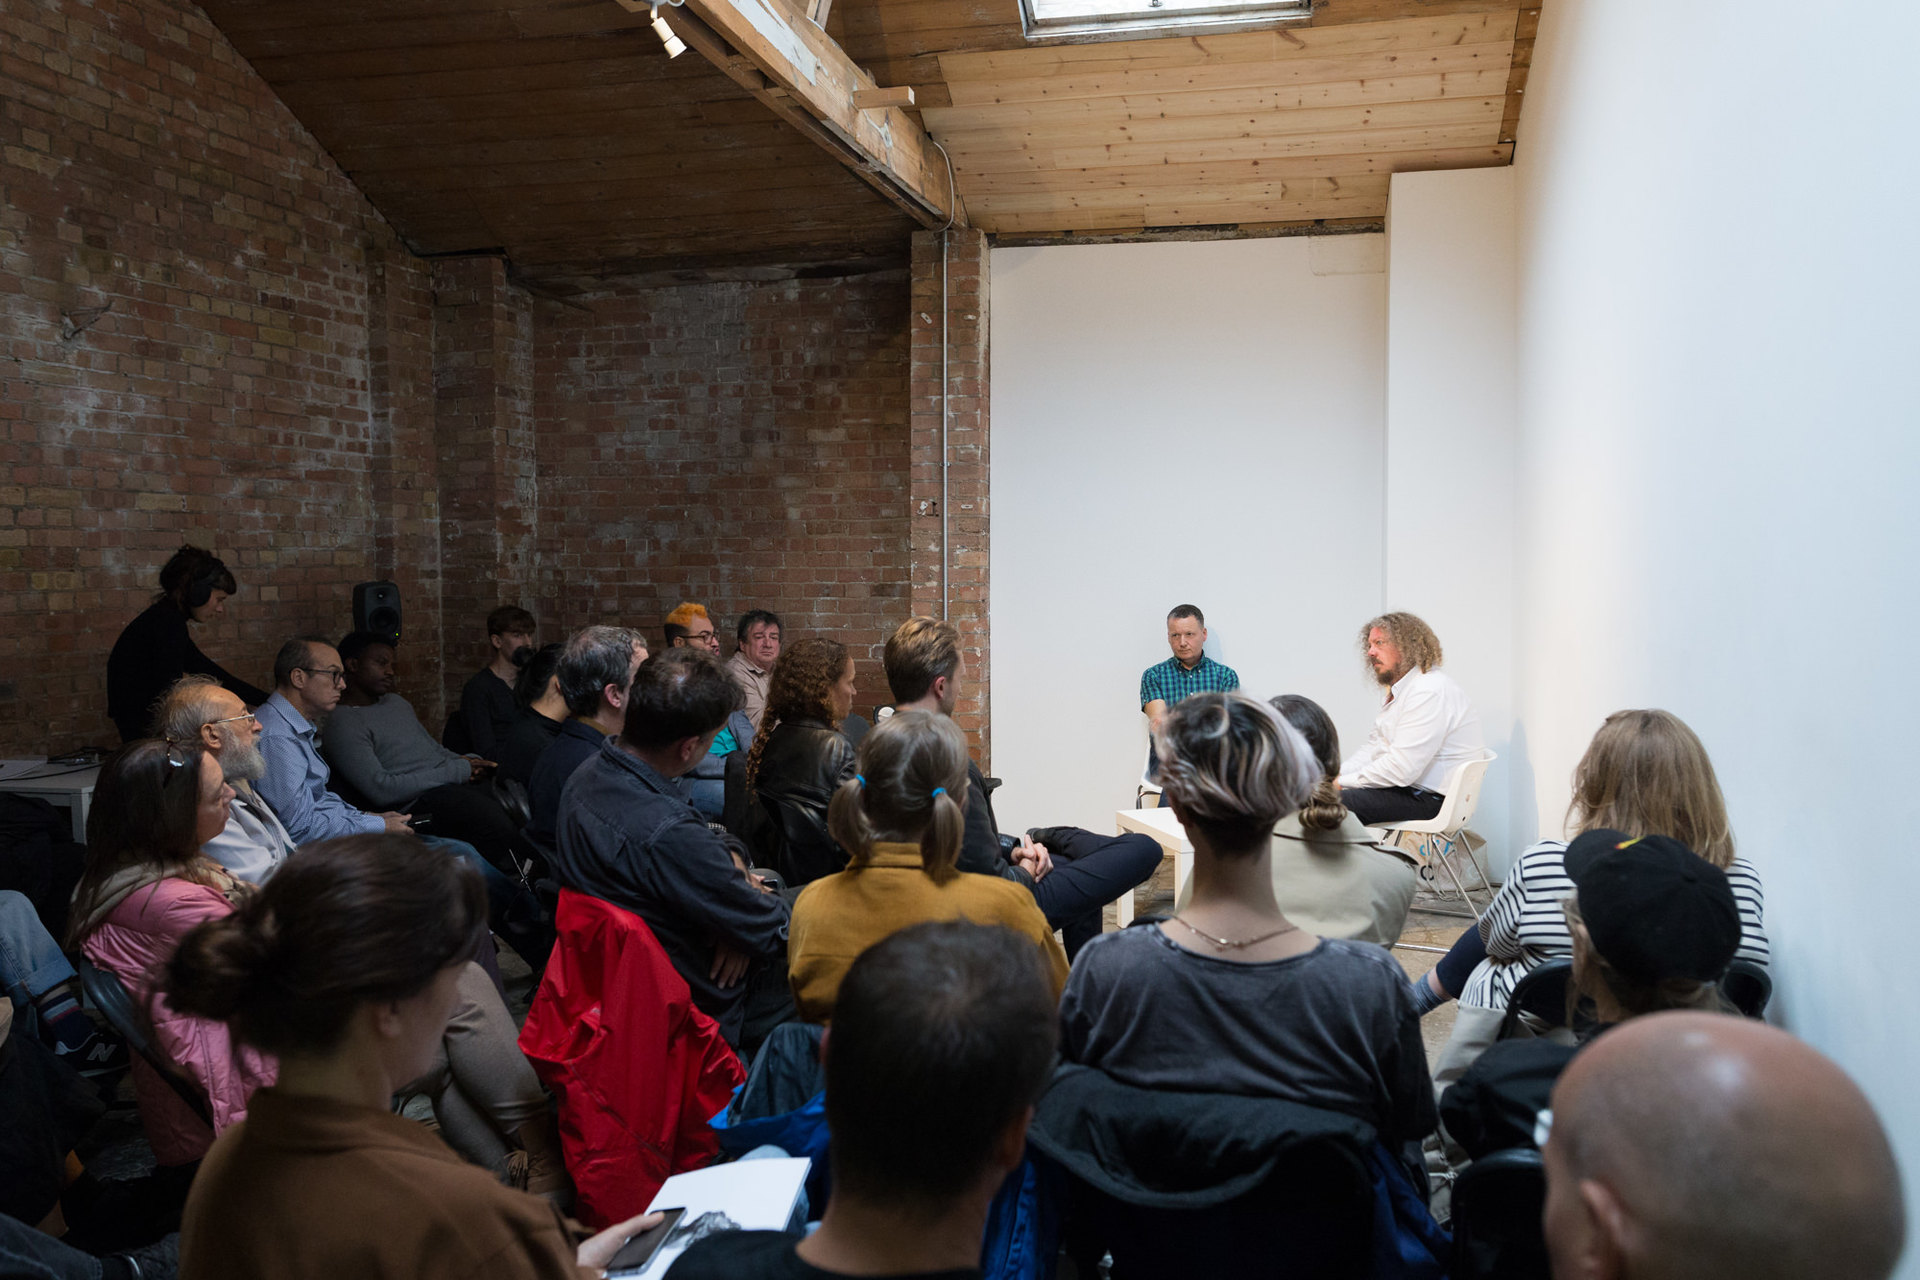 Mathieu Copeland and Stewart Home in conversation, 2019, Shit and Doom - NO!art, Cell Project Space